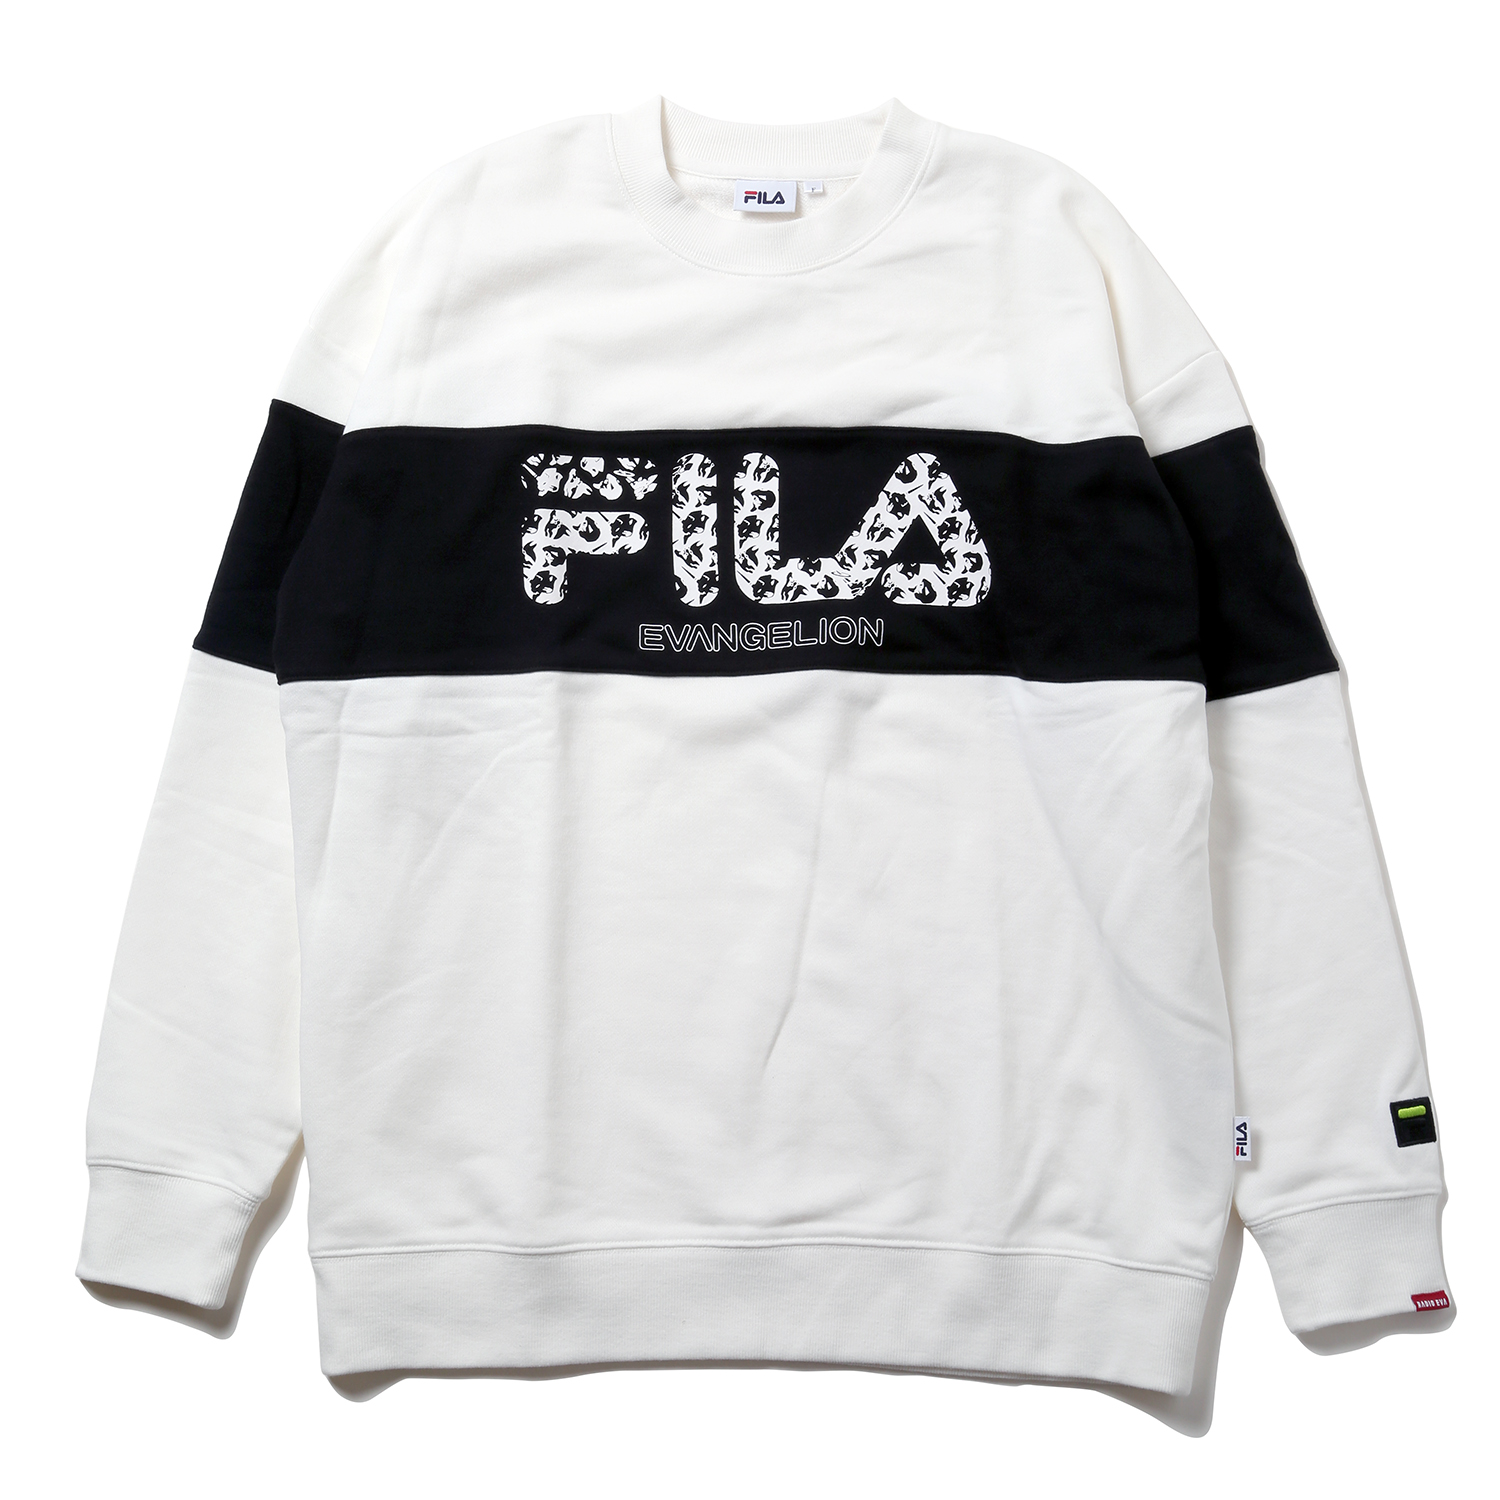 These Neon Genesis Evangelion x FILA Apparel Will Get You Ready